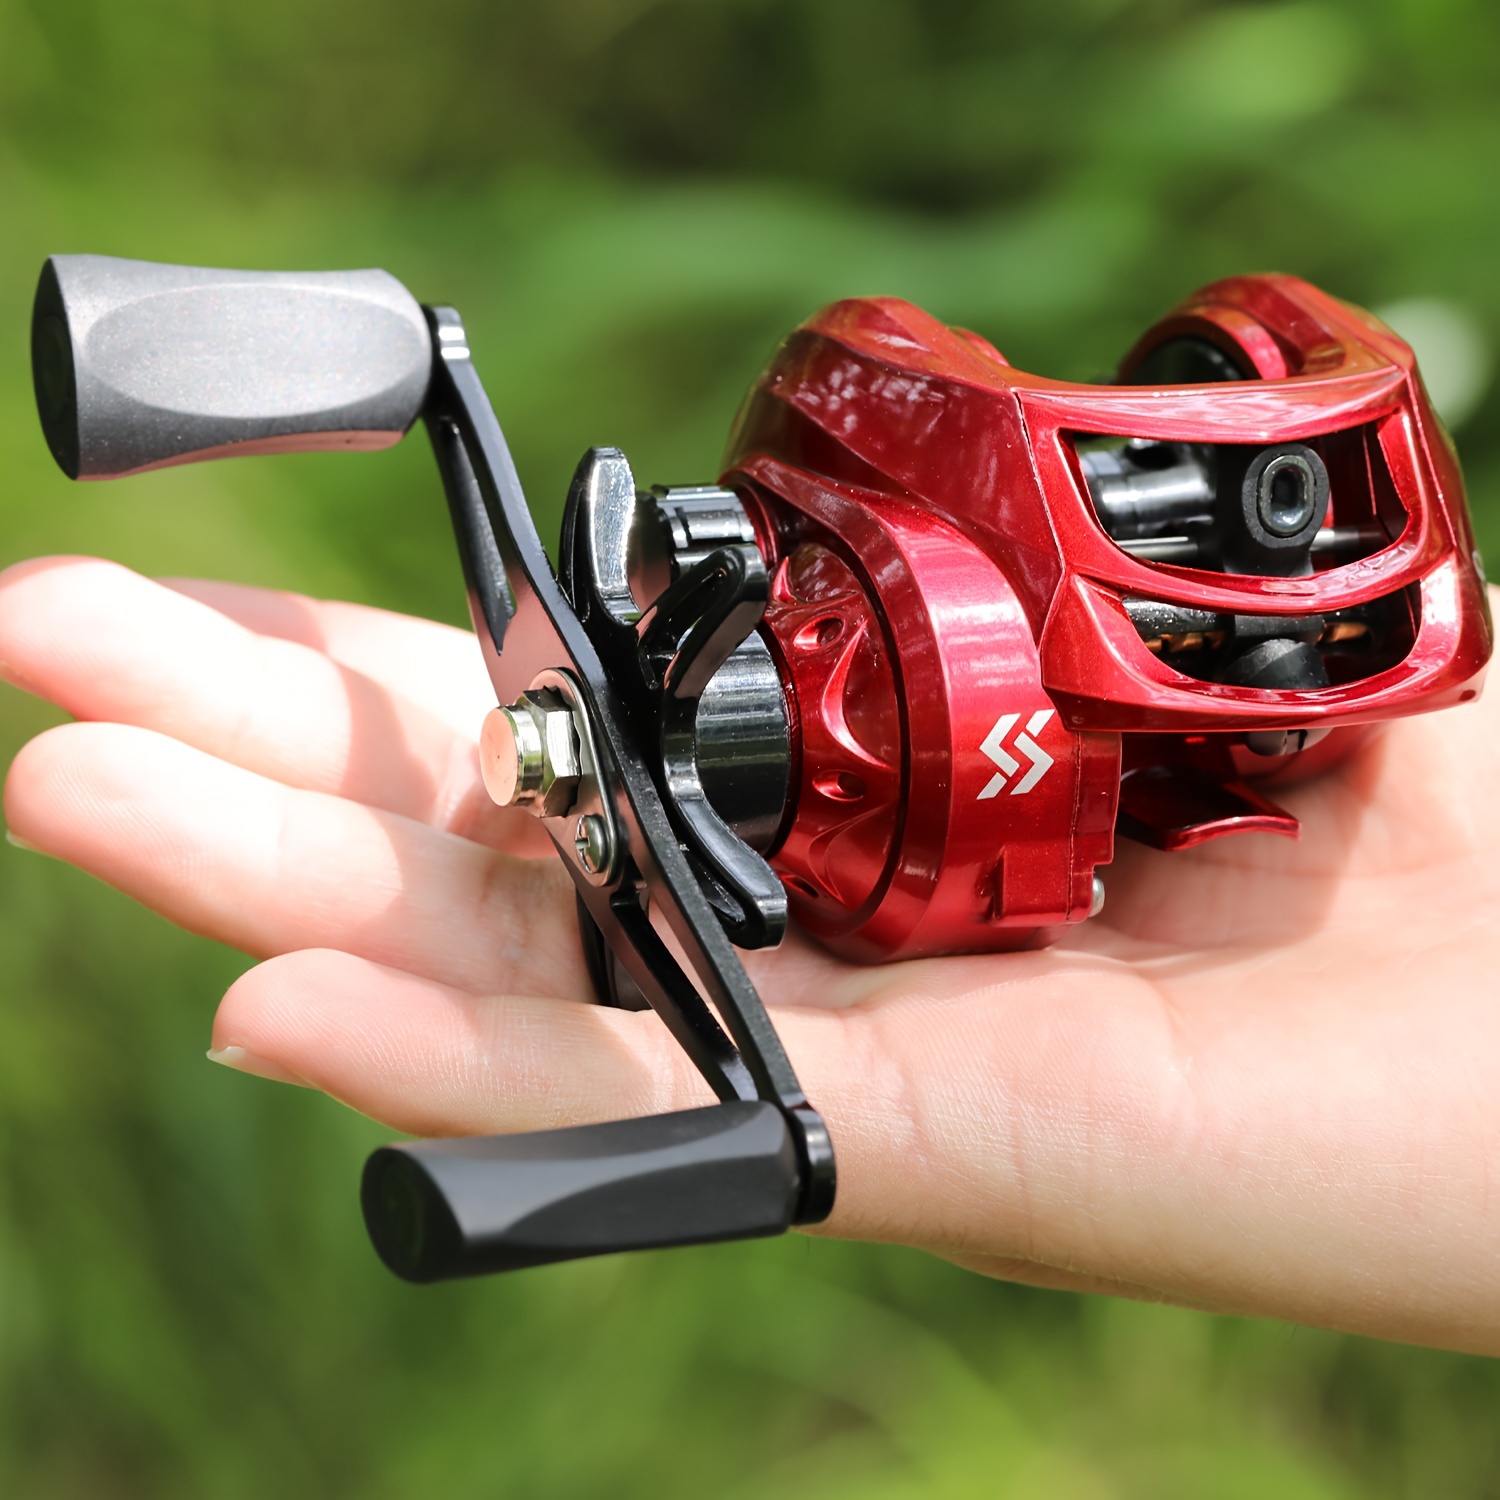 Sougayilang Fishing Baitcasting Reels, 7.3:1 Gear Ratio Fishing Reels , Low  Profile Reel with Magnetic Braking System , Super Polymer Grips,Carbon